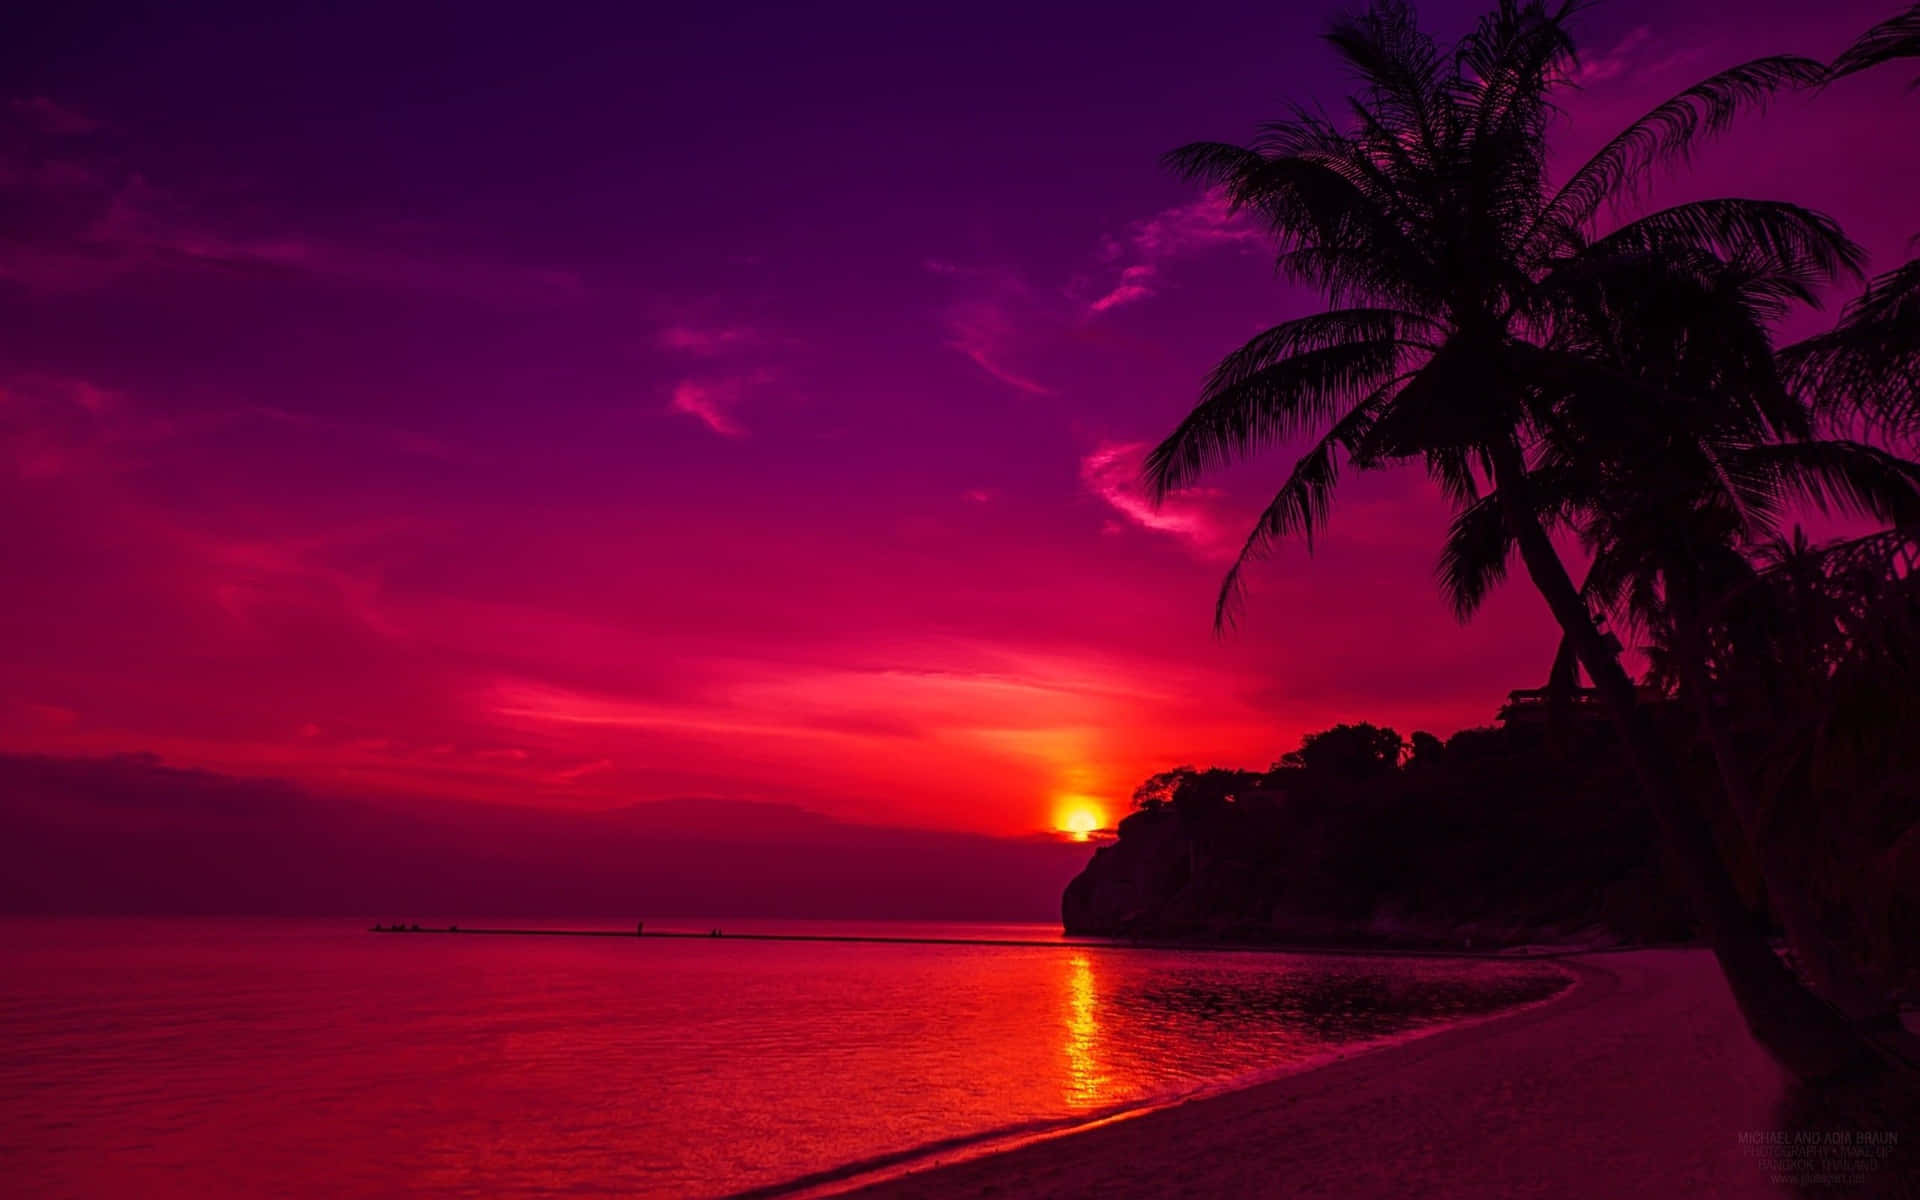 A dreamy beach sunset, perfect for a romantic evening.